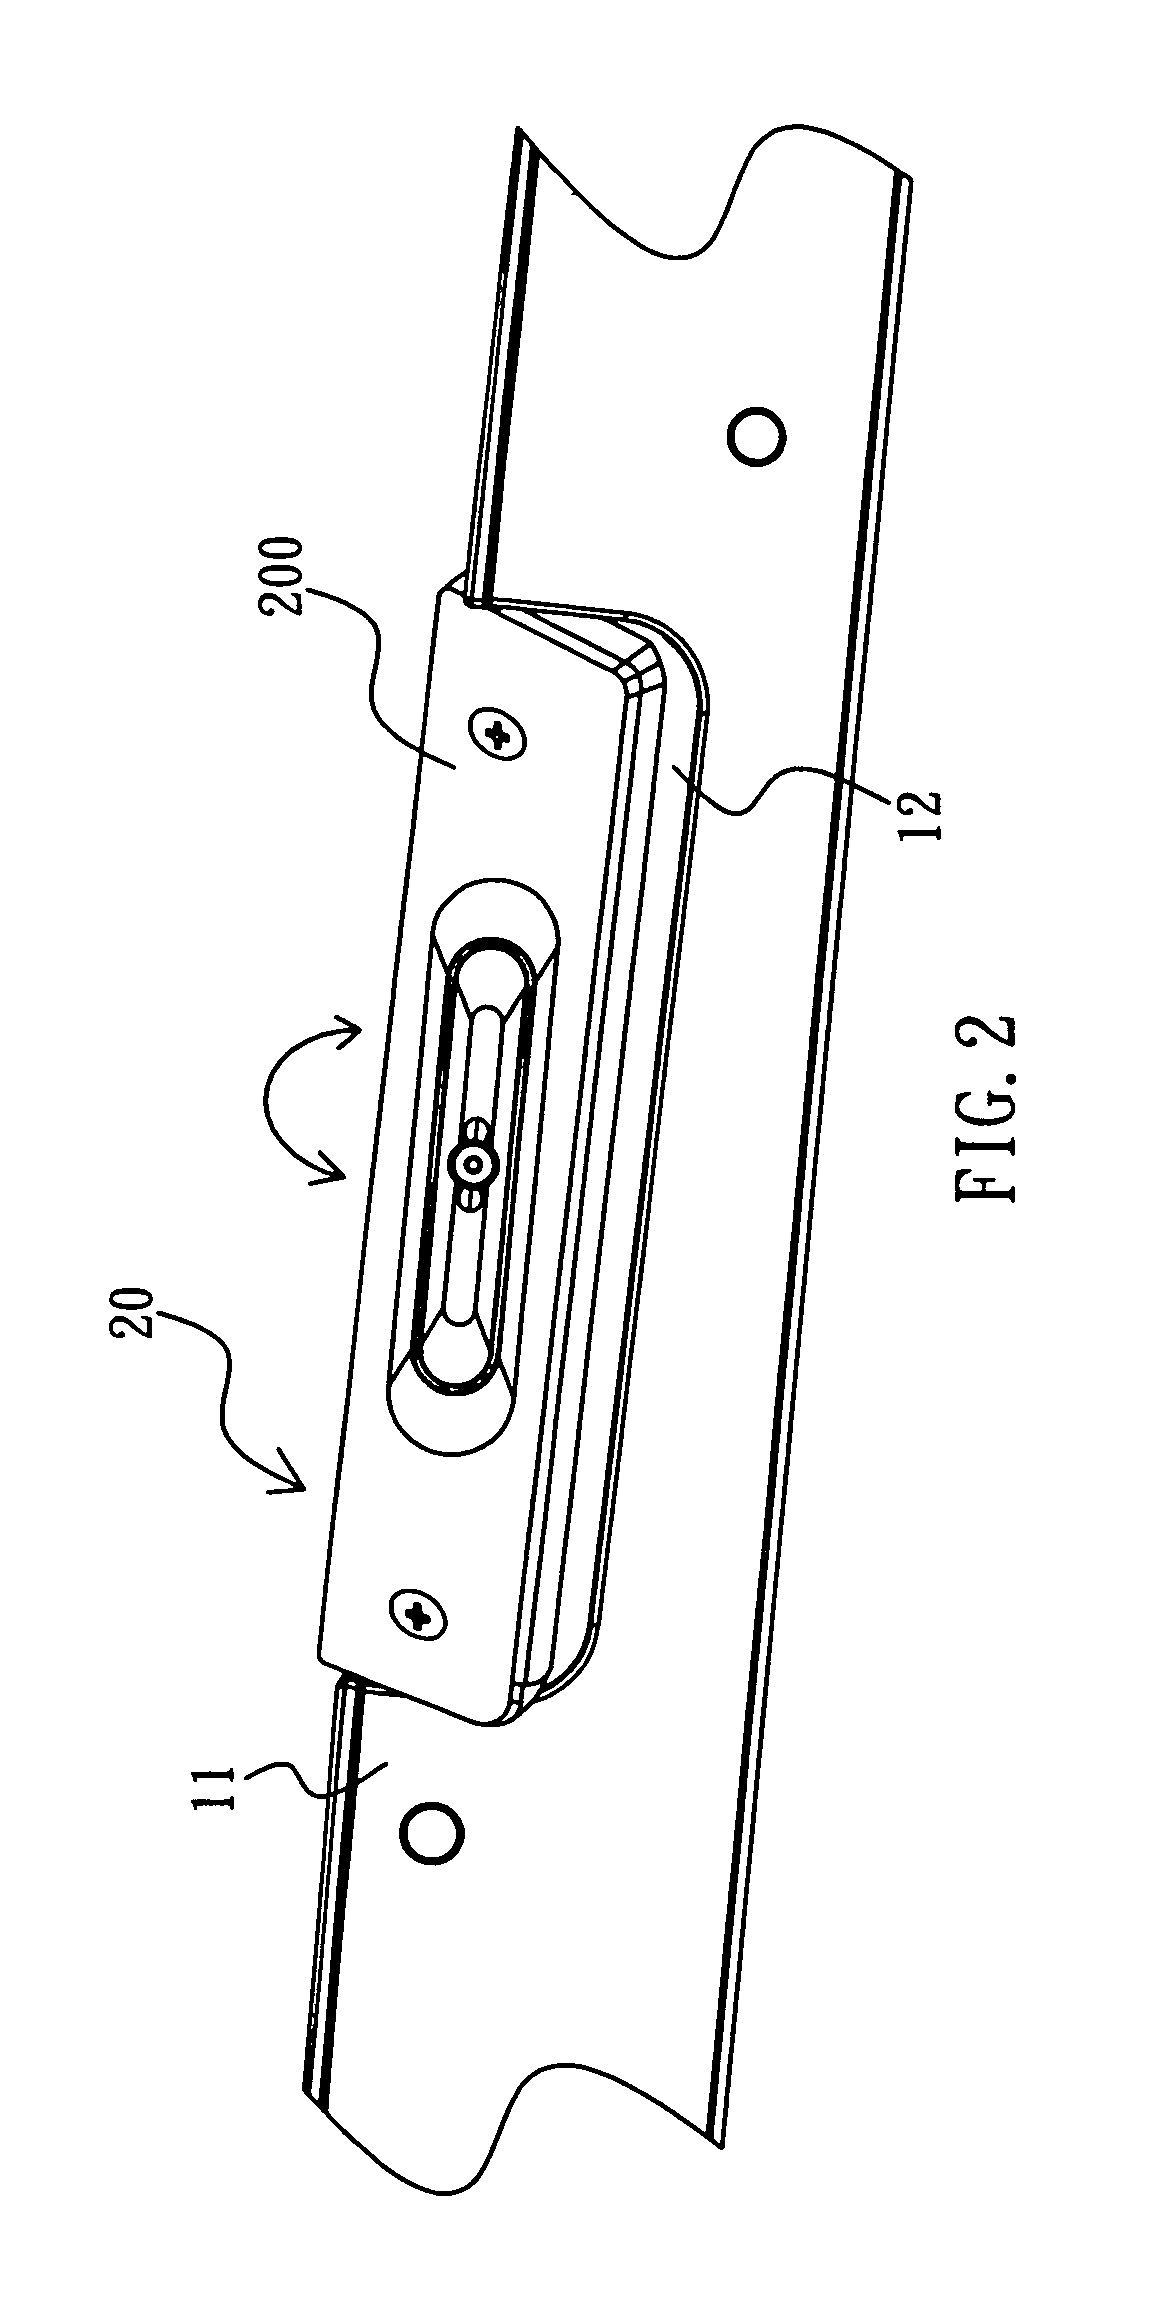 Rotational casing associated with an electronic device